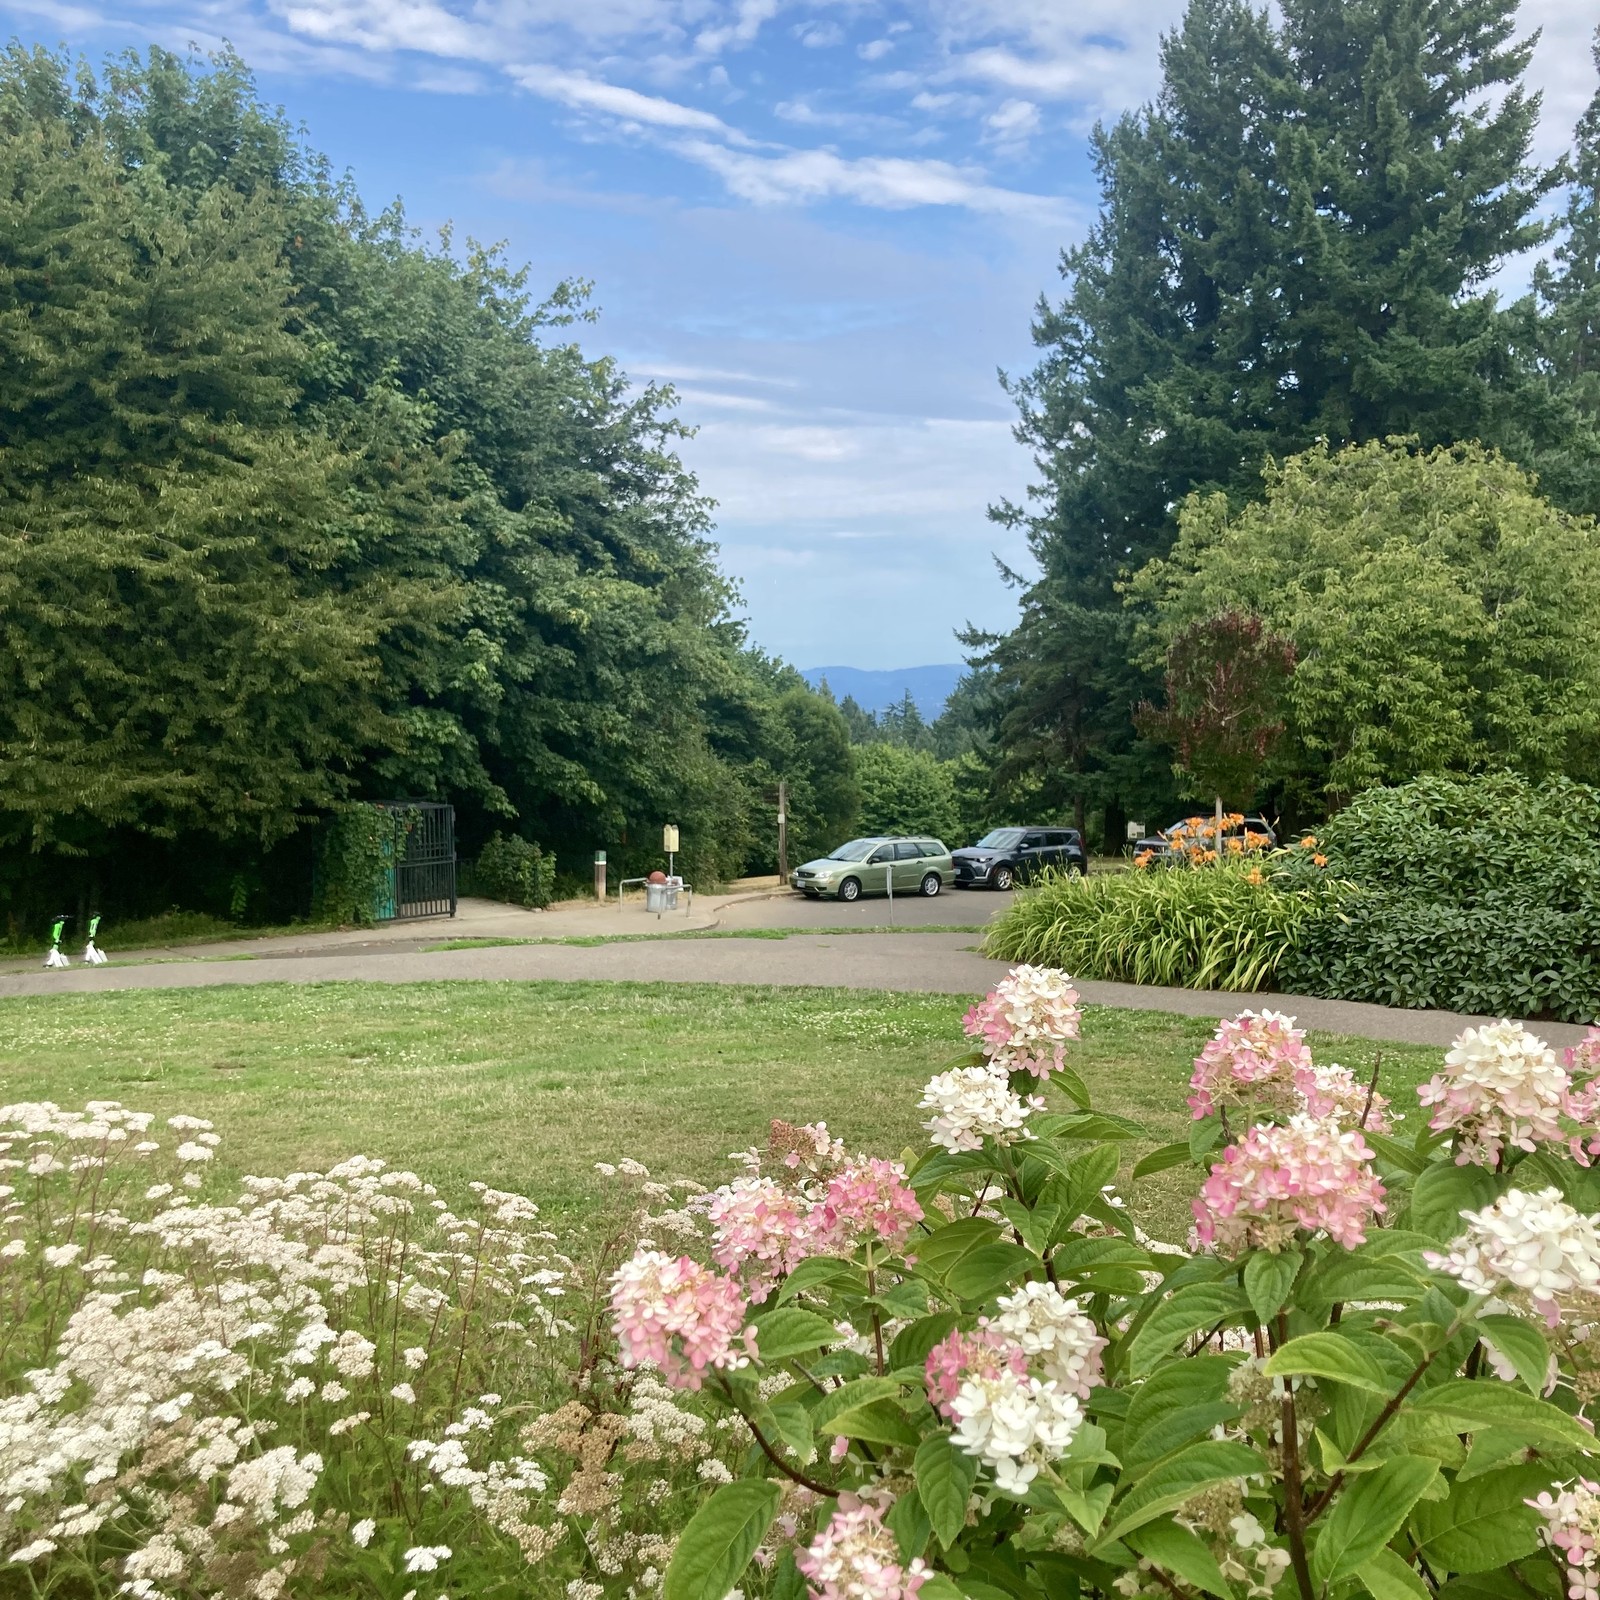 View toward Mt. Hood from Council Crest Park late on a humid summer afternoon. The mountain is not visible. Sky is partly sunny but hazy with humidity. In the foreground is a stand of flowers in full bloom: hydrangeas, Queen Annes Lace, Roses, Asian Lilies